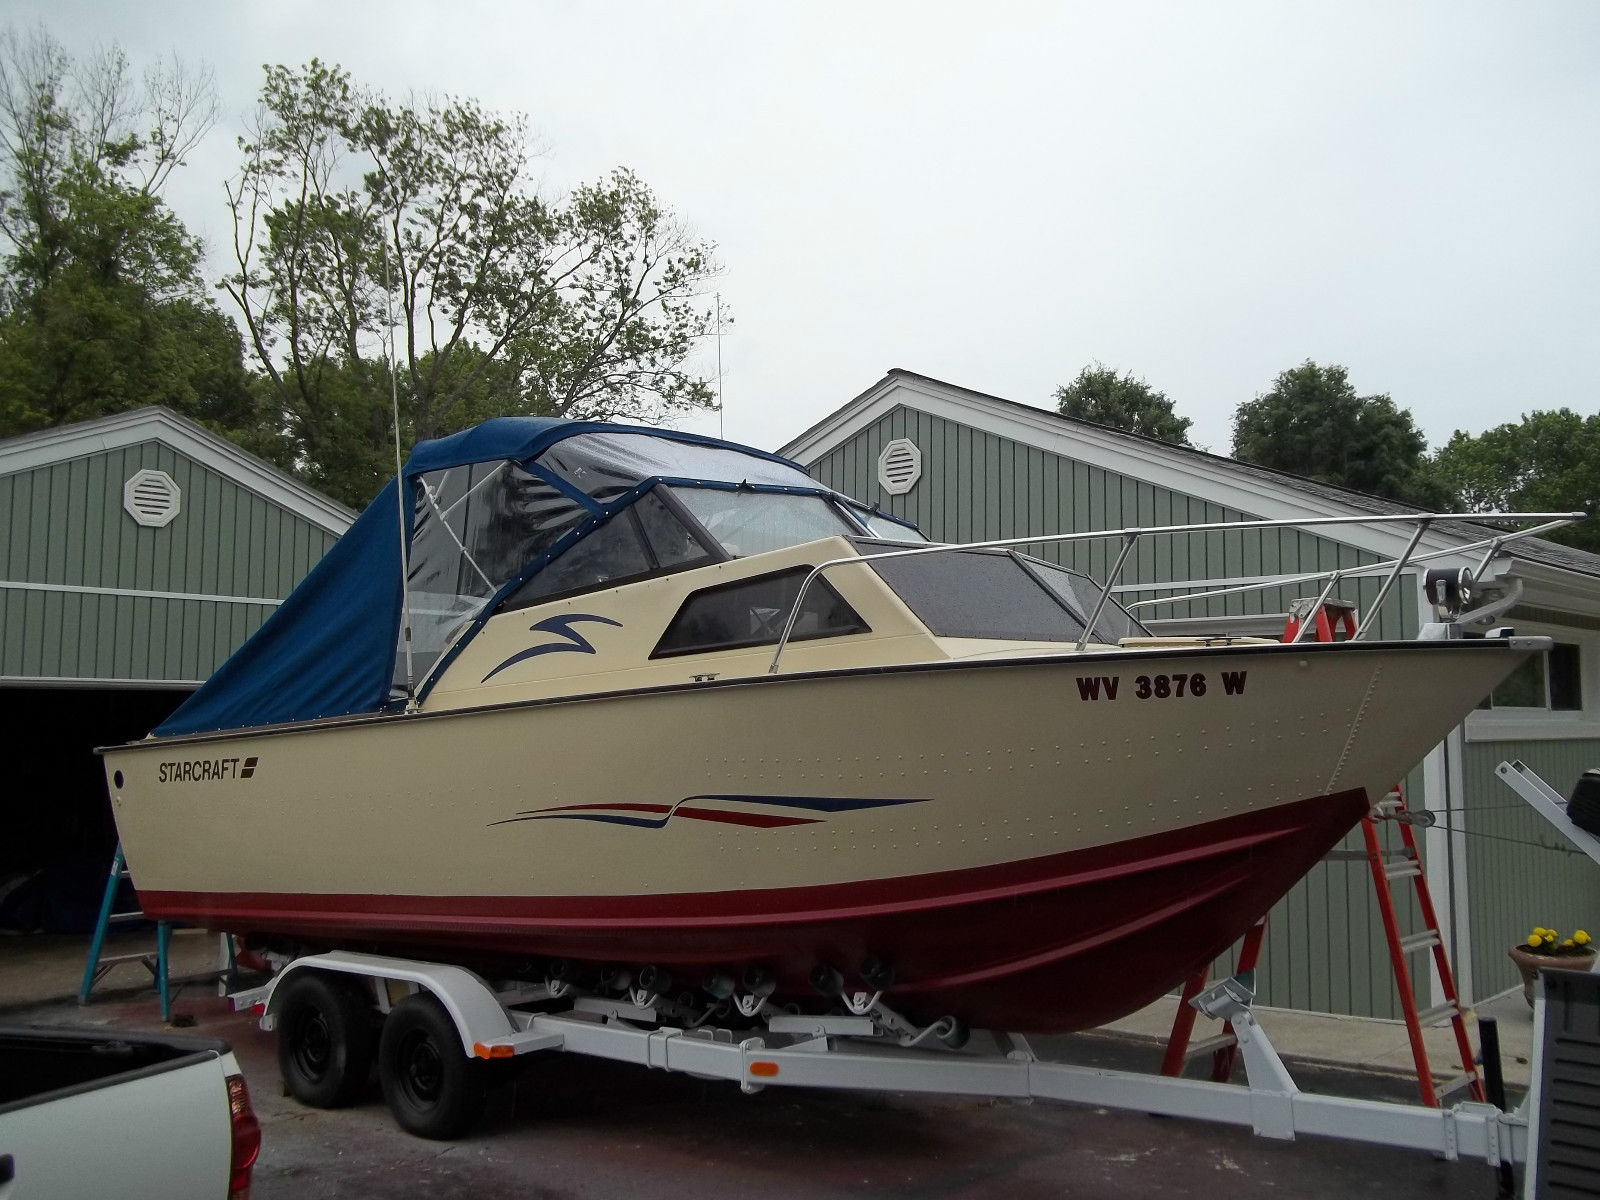 Search starcraft islander prices - more than 301 listings - rare 22 foot al...